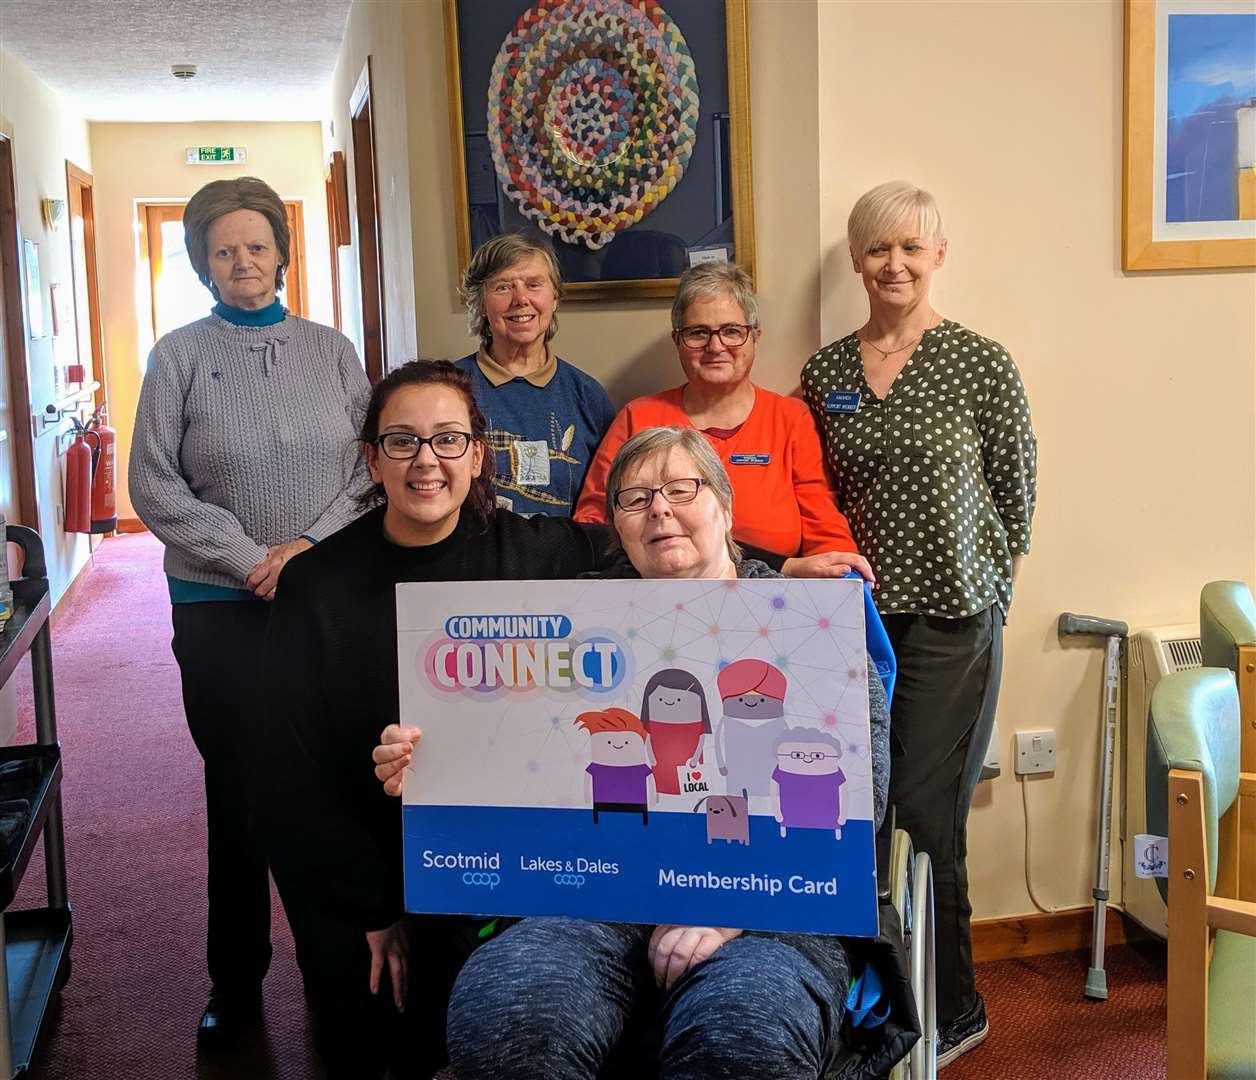 Members of the Glenurquhart Care project celebrate a £8500 award from Scotmid Co-operative’s Community Connect award scheme.